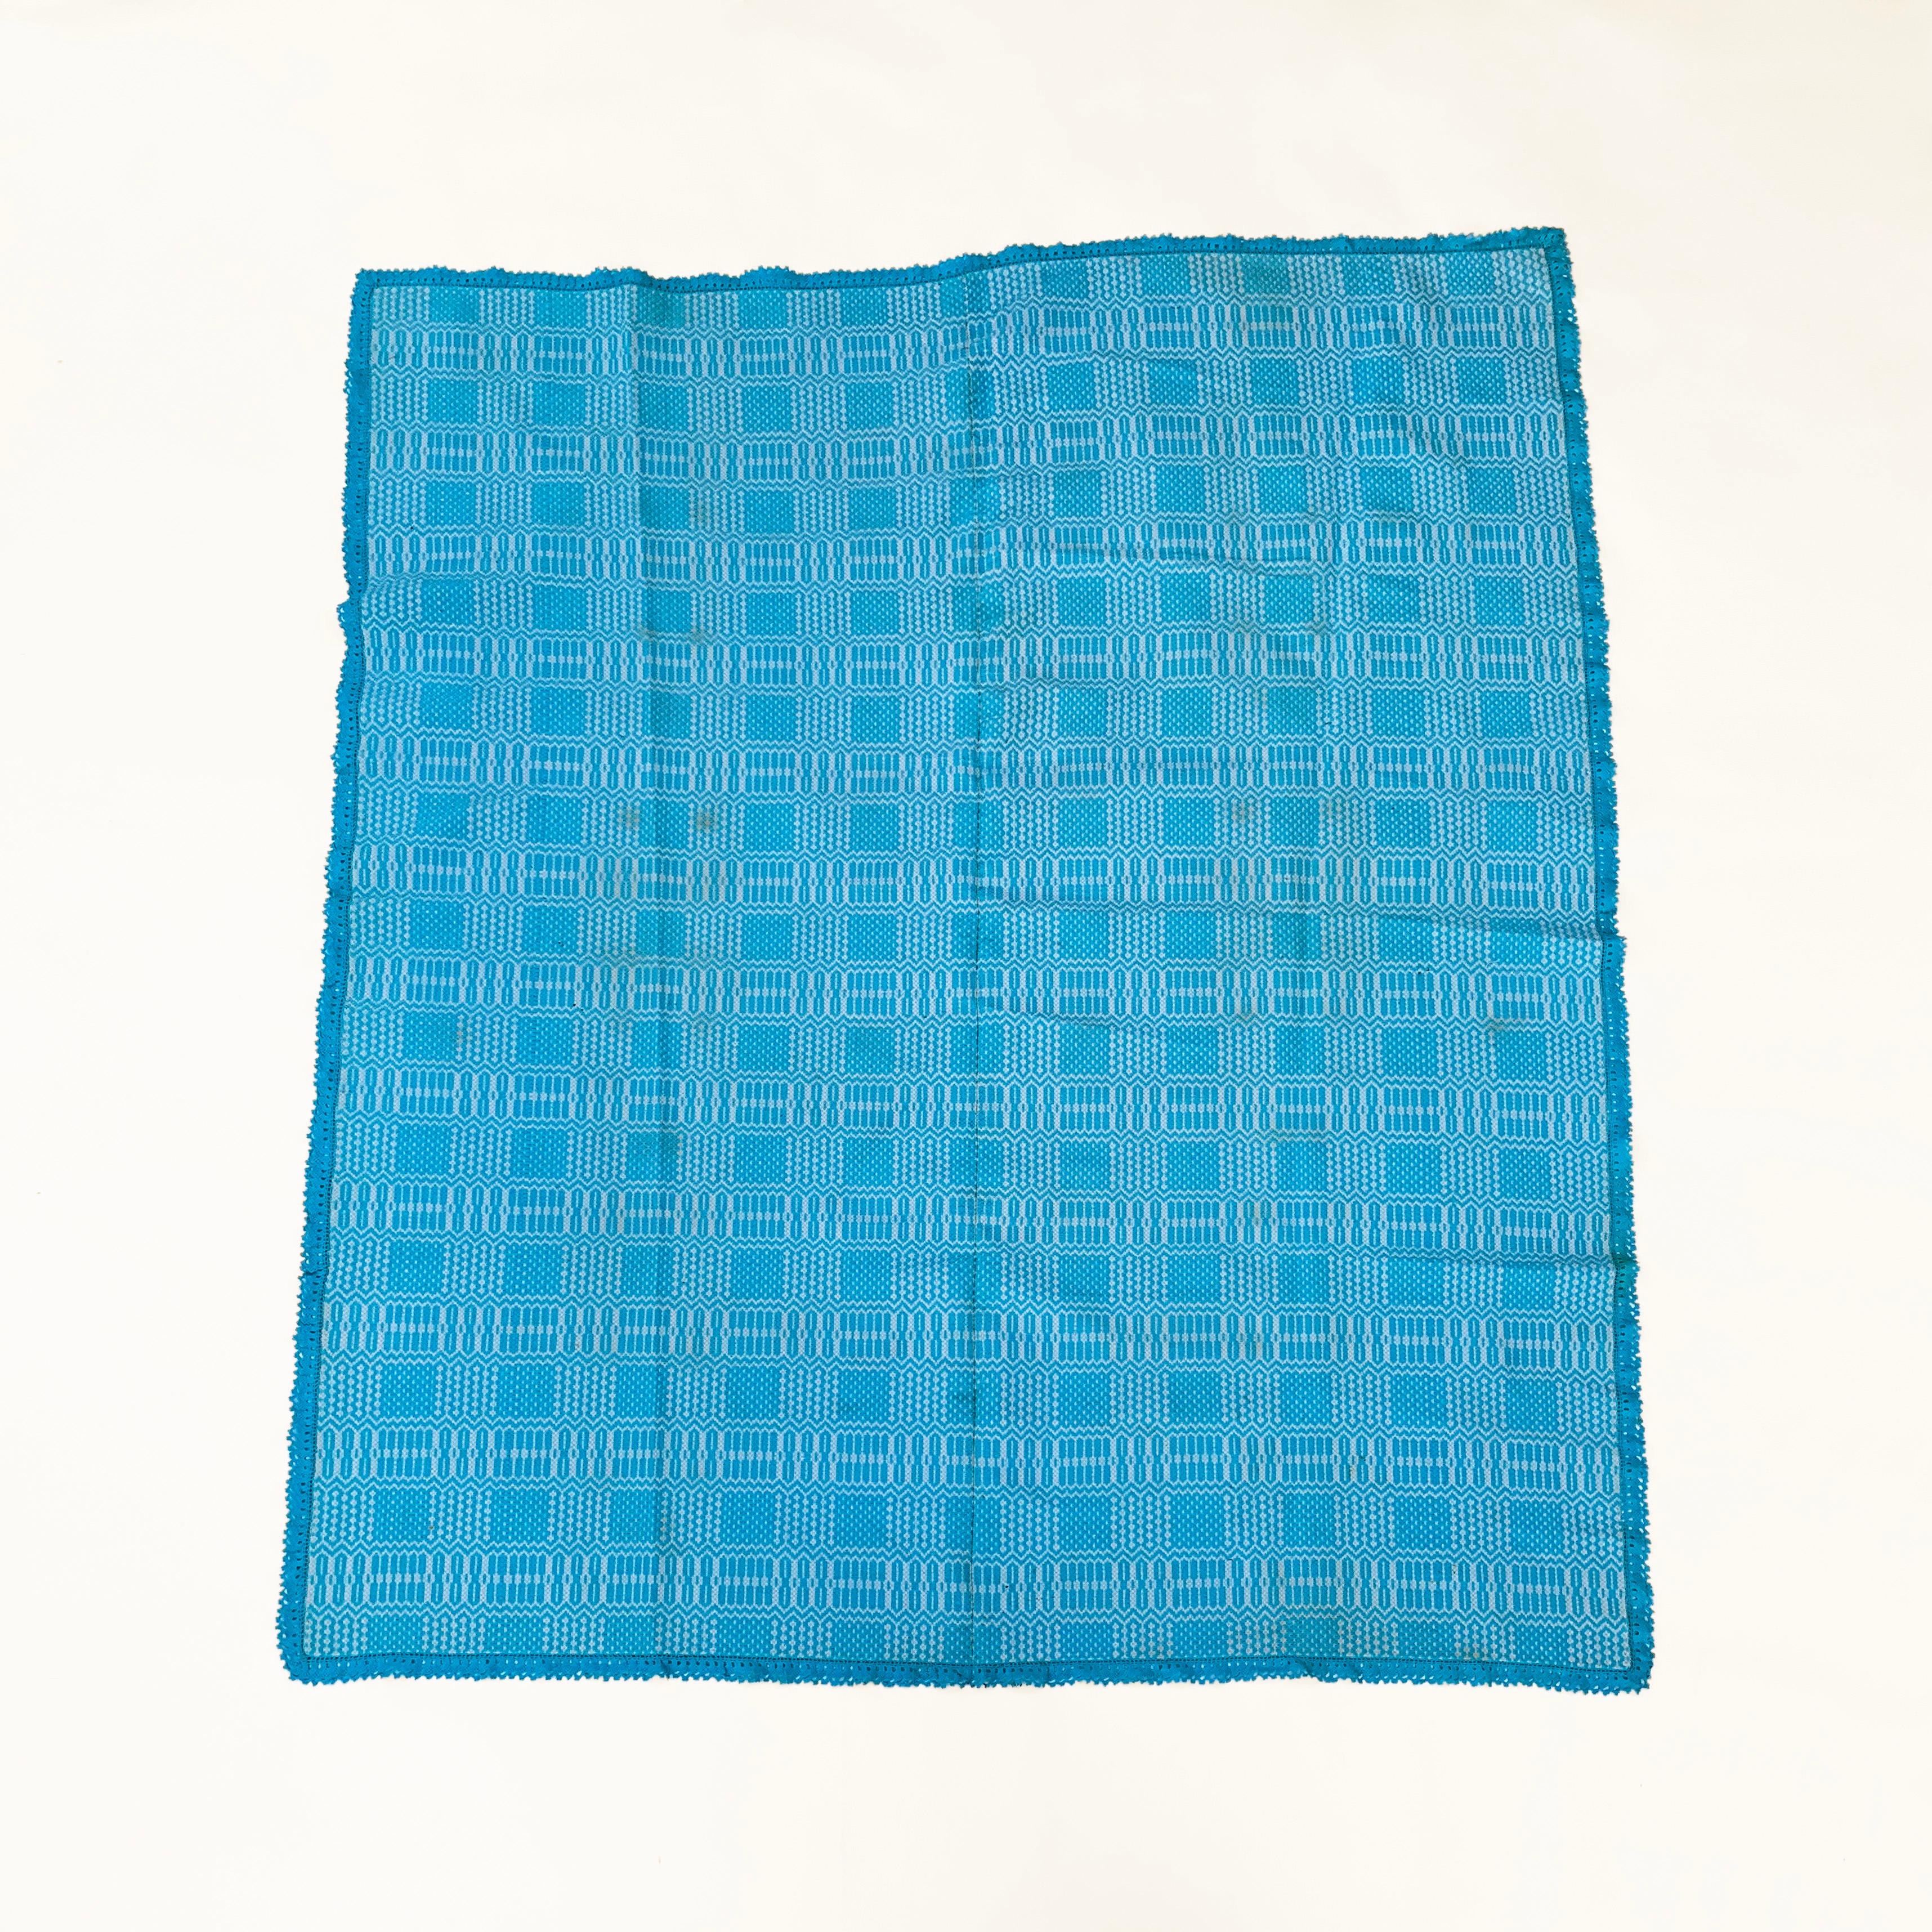 A large, baby blue blanket – that could be used as a throw, comforter, or piece of decorative wall art. This woven coverlet is made from a soft cotton and wool mix, and fits easily on a standard double bed. The piece was produced in the 1950s in